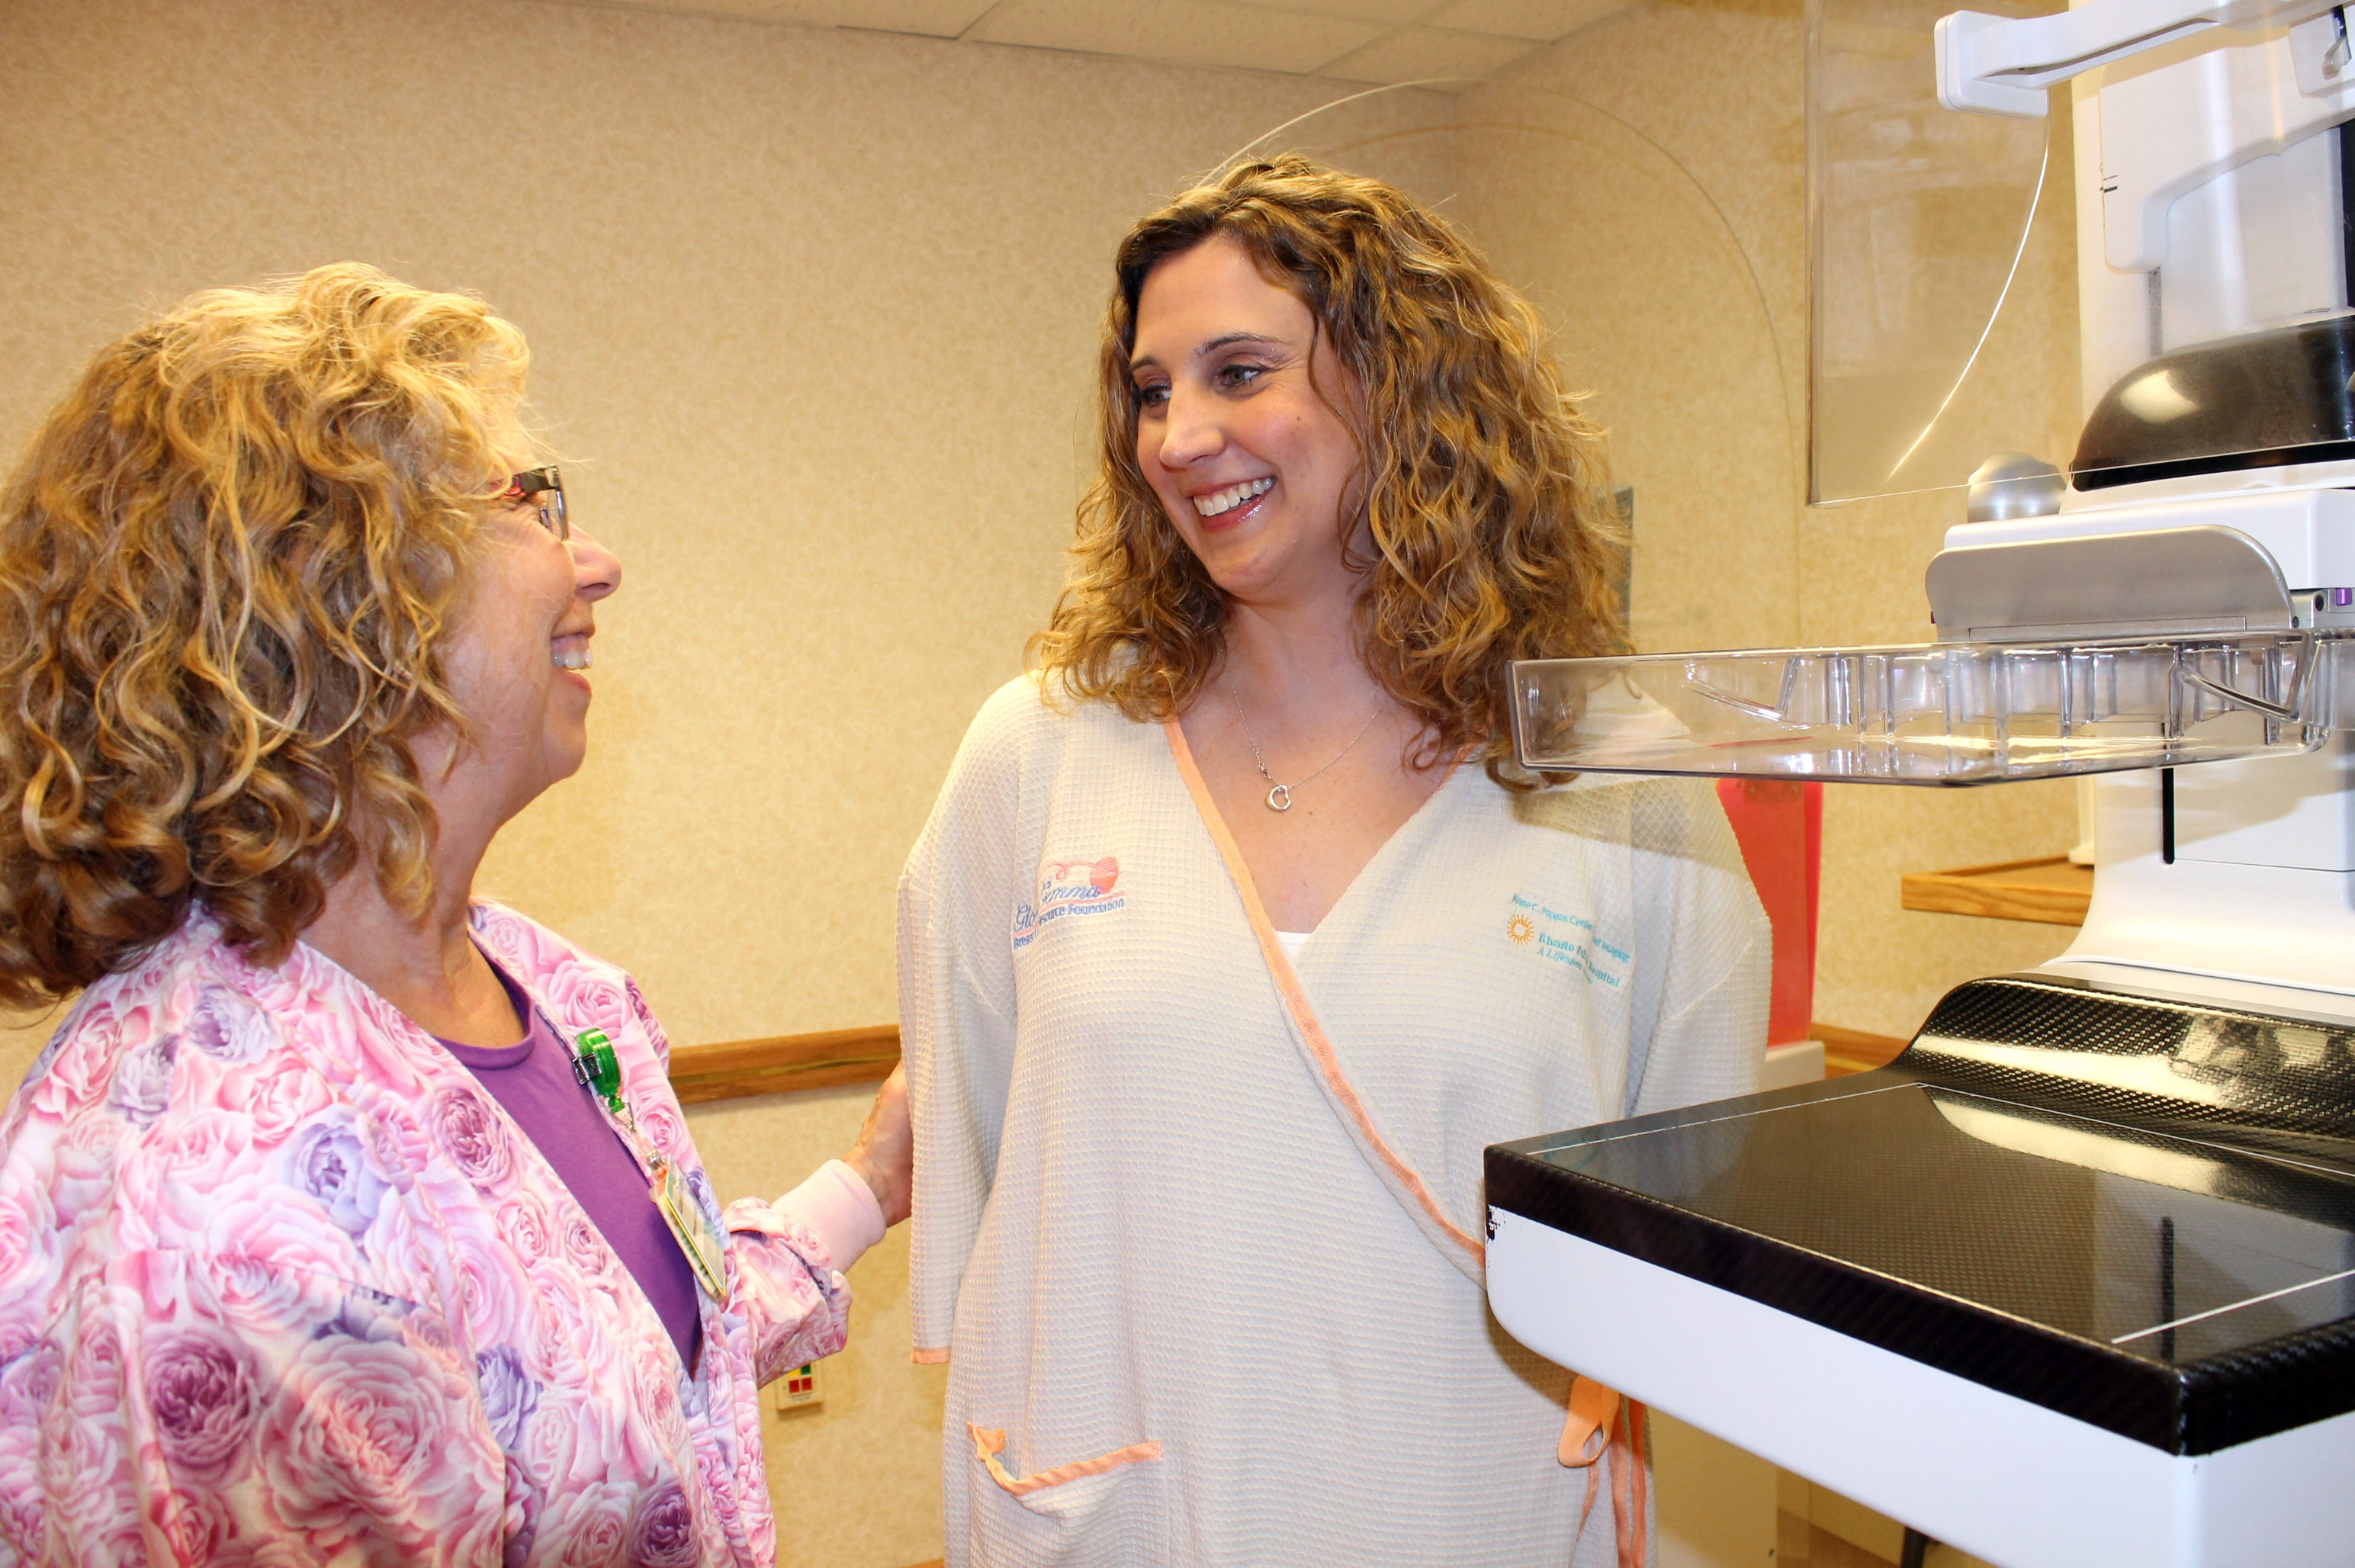 The Anne C. Pappas Center for Breast Imaging